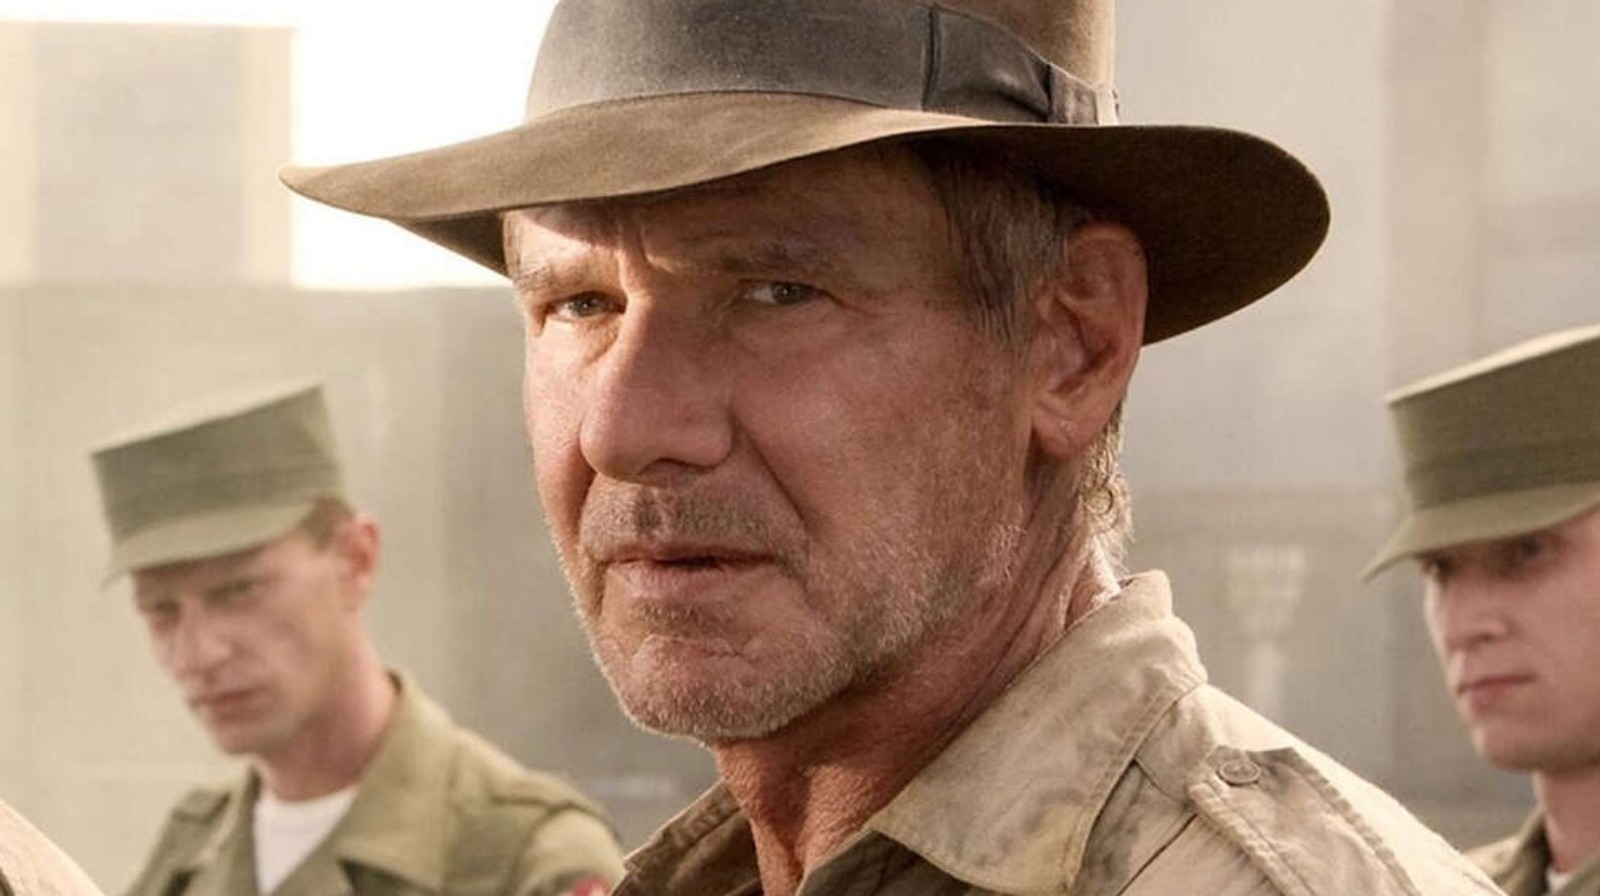 All Indiana Jones Movies Ranked by Tomatometer